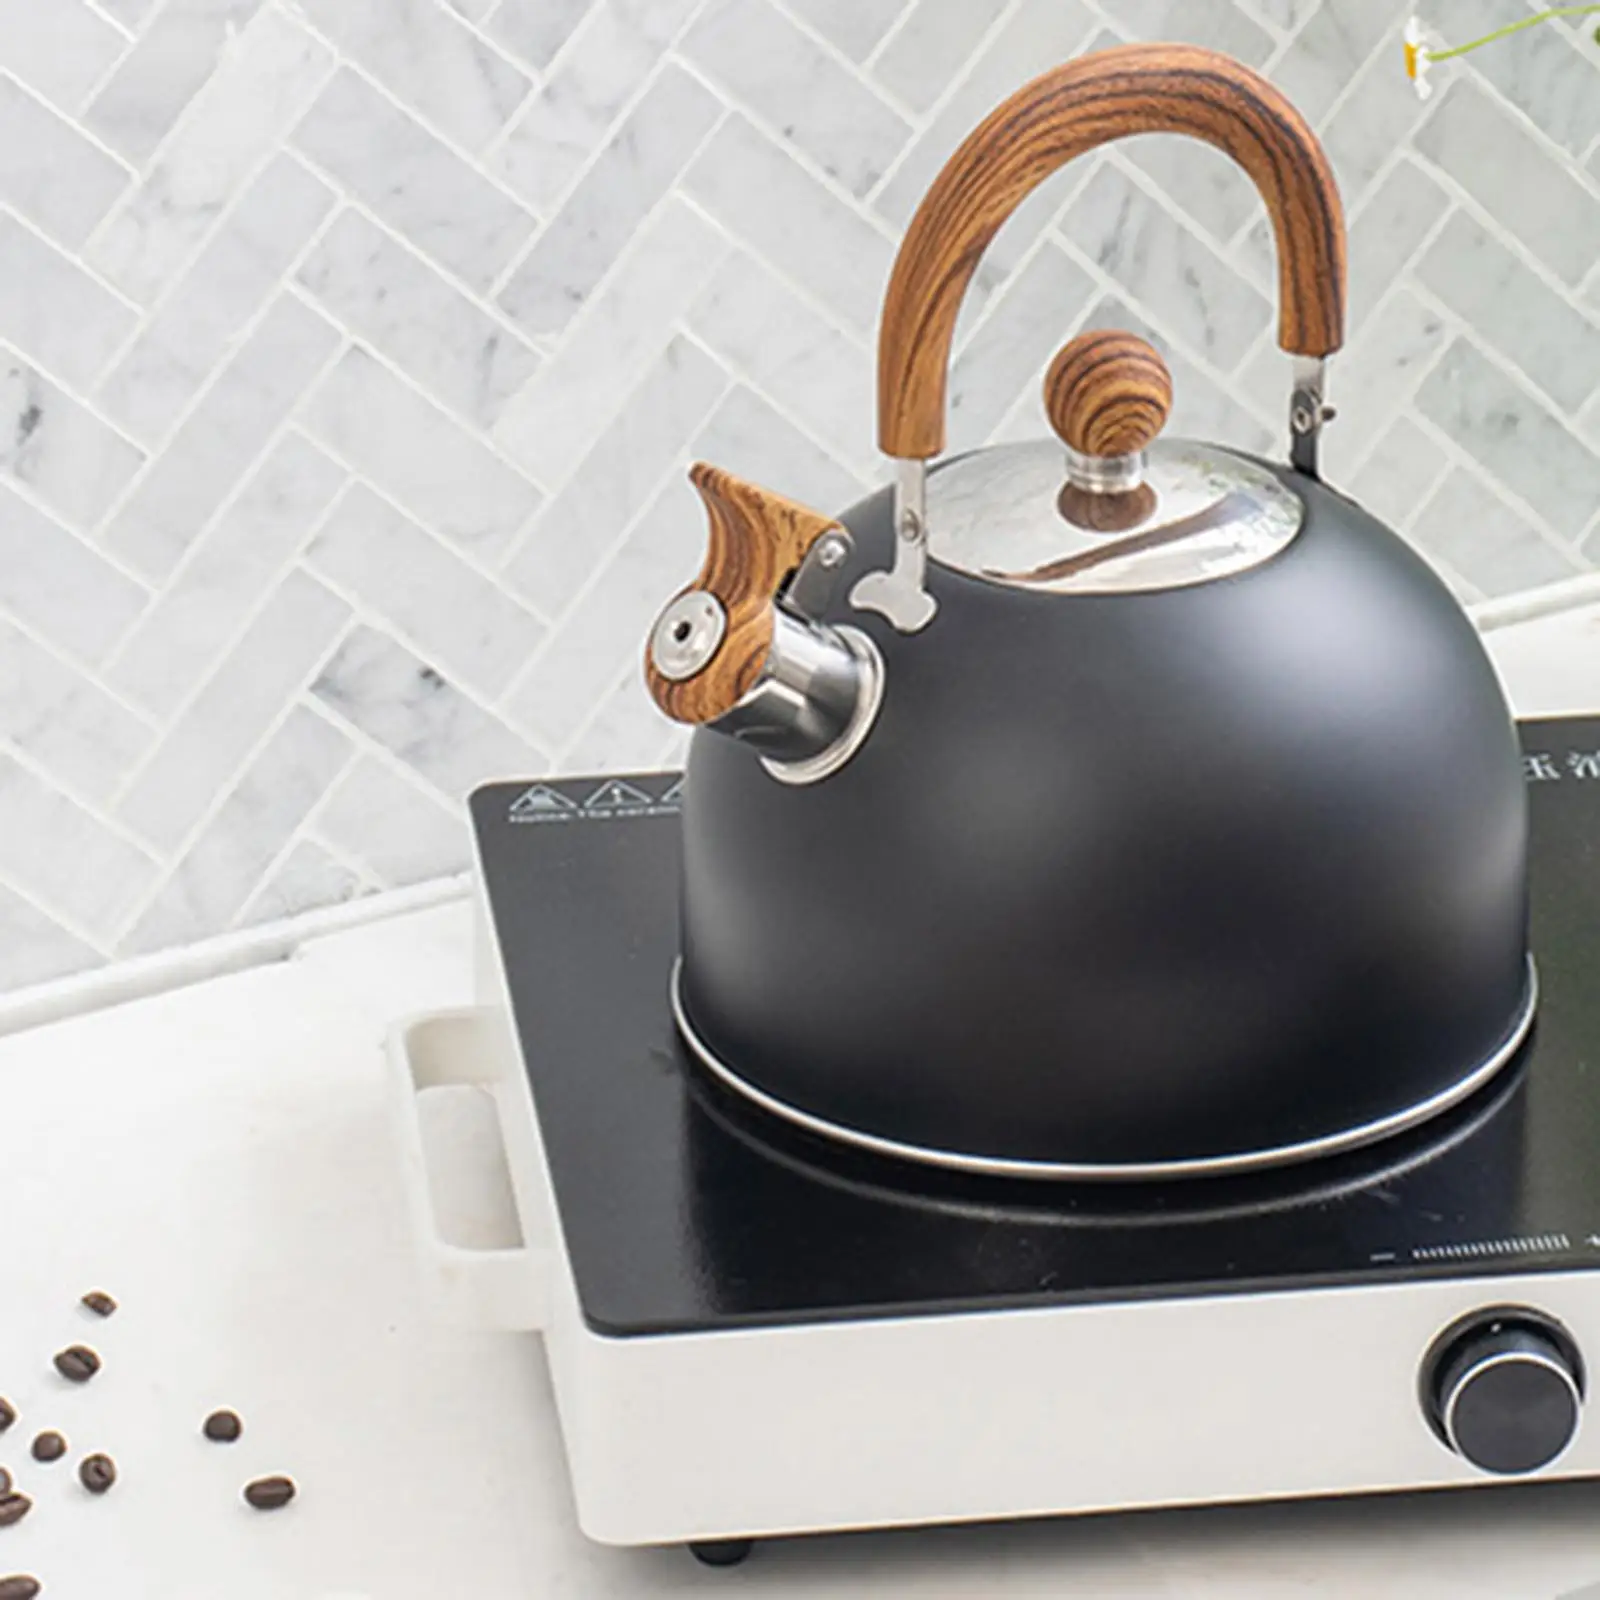 Durable Kettle with Whistle Hot Water Kettle Fast Heating Whistling Teapot Stainless Steel Stovetop Tea Kettle for Stove Top